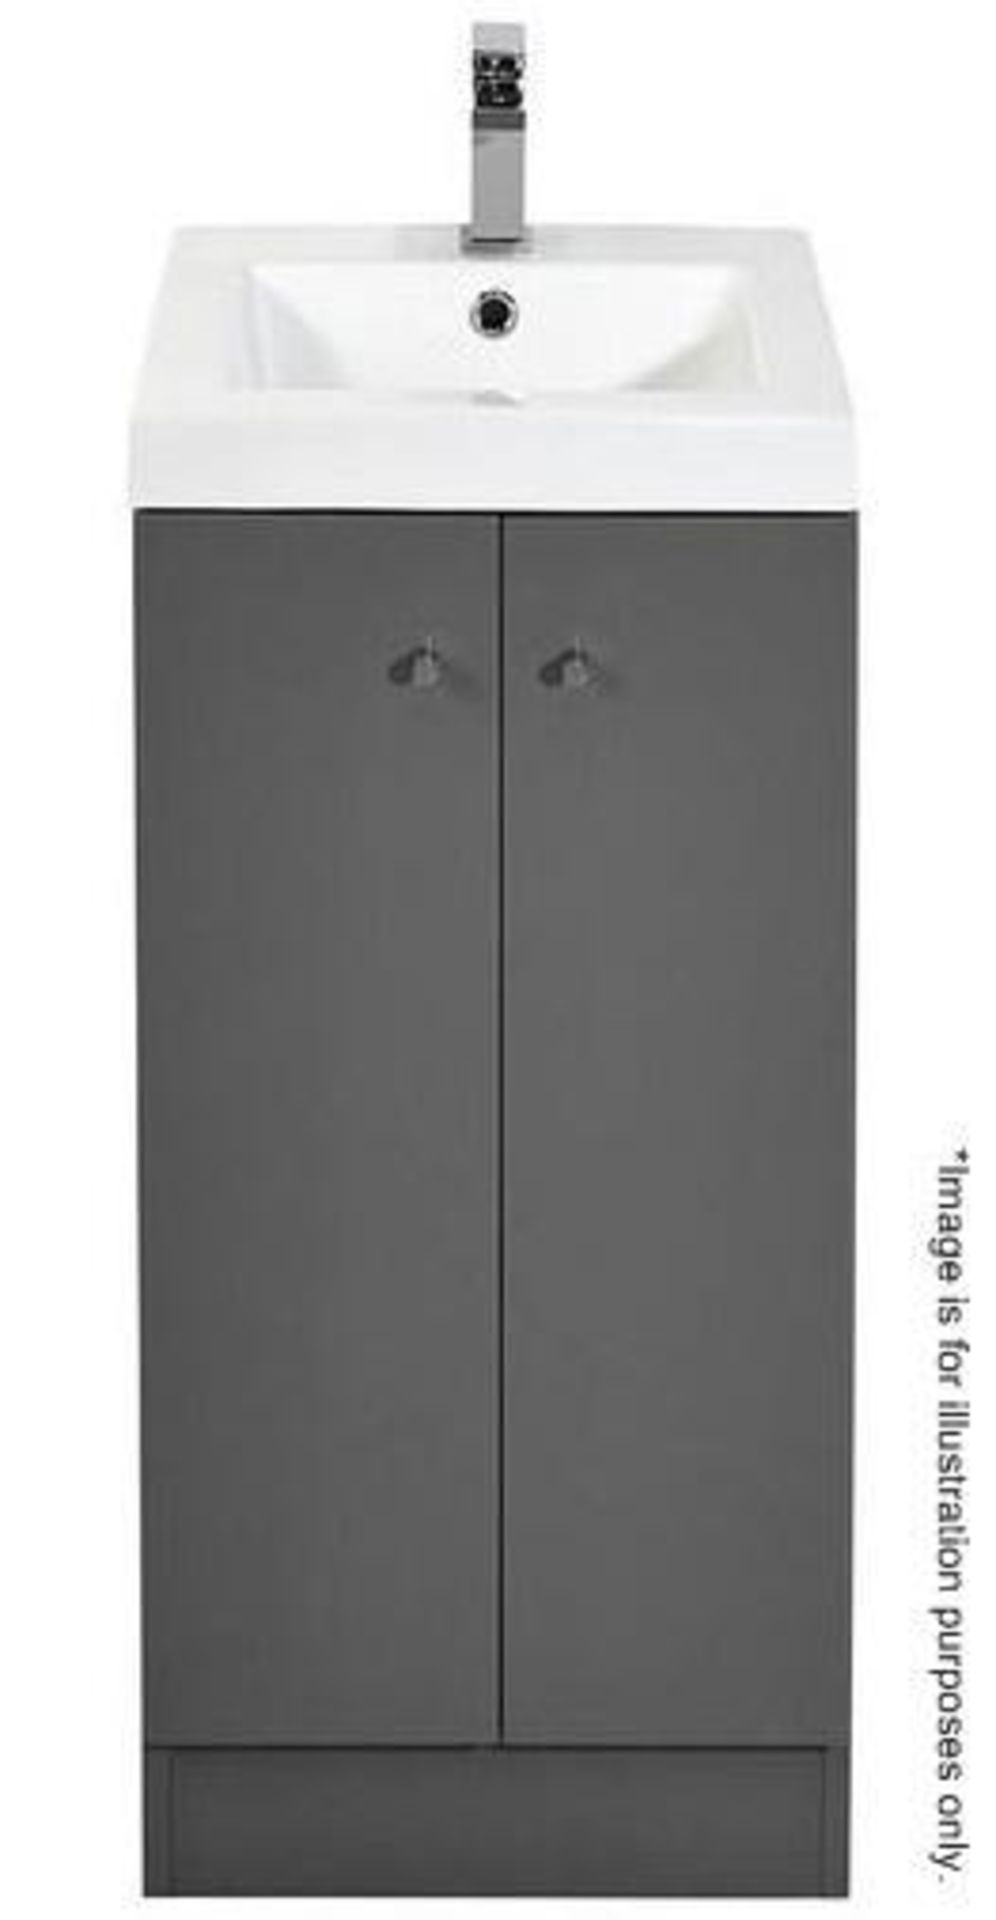 7 x Alpine Duo 400 Floorstanding Vanity Units In Gloss Grey - Brand New Boxed Stock - Dimensions: H8 - Image 2 of 3